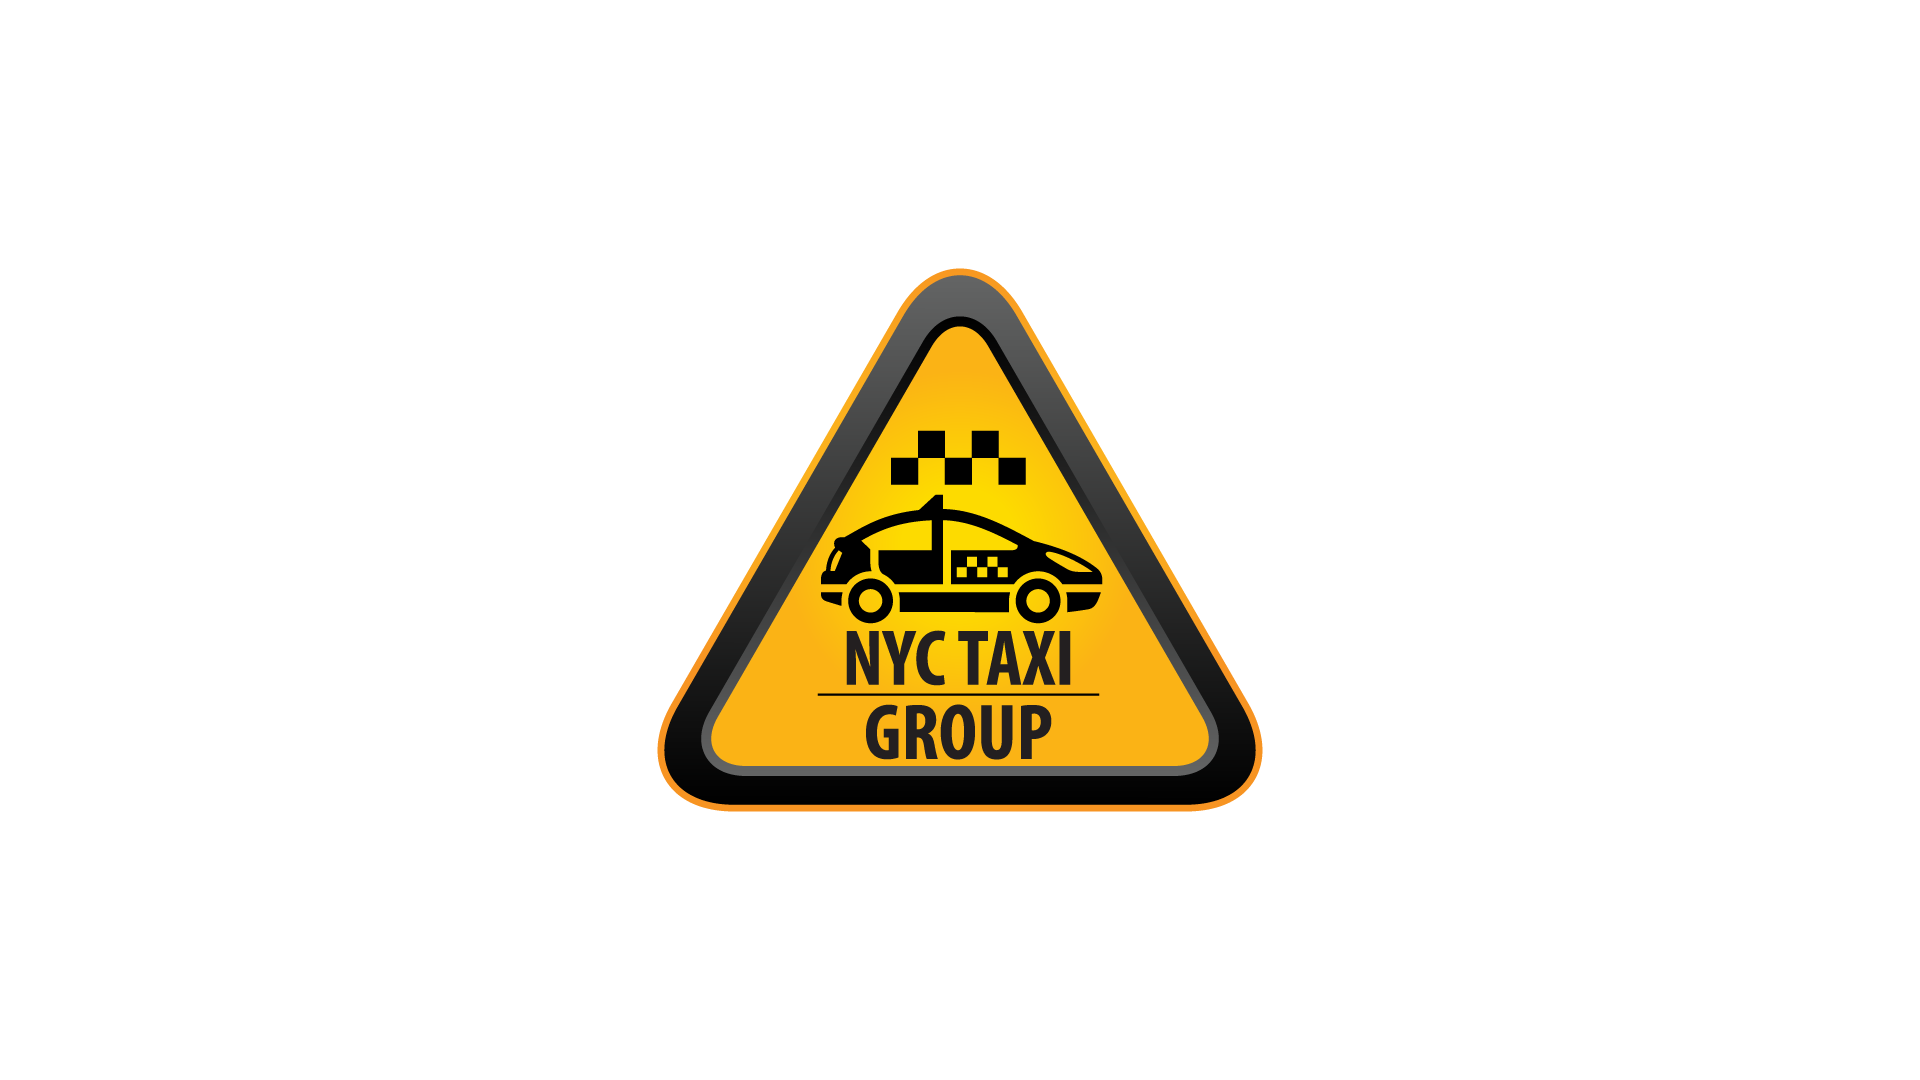 NYC Taxi Group